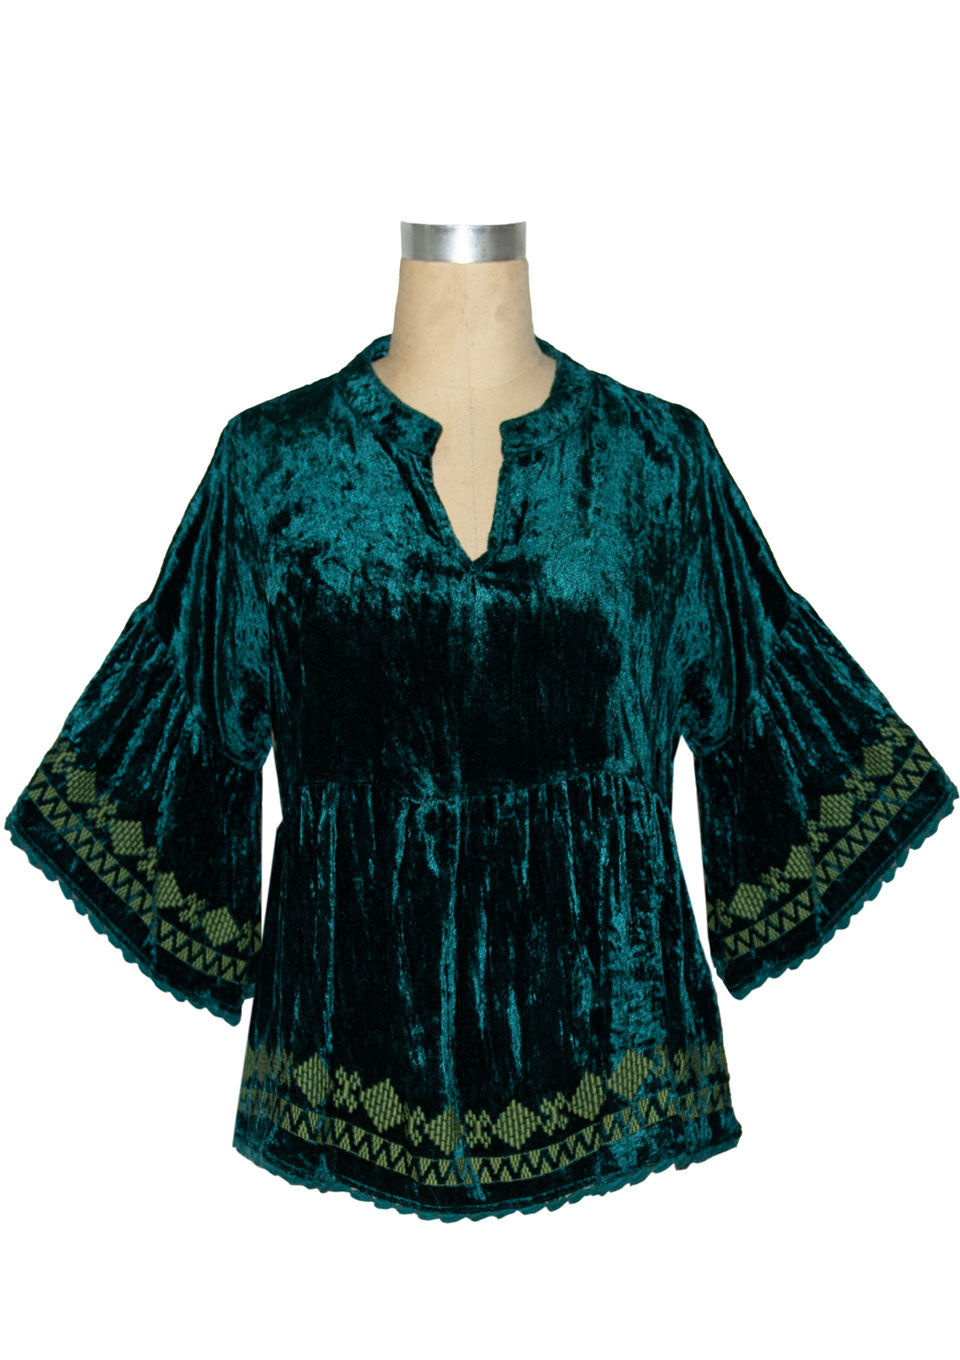 Ivy Jane Teal Embrodiered Velvet Top 6Whiskey Winter 2020